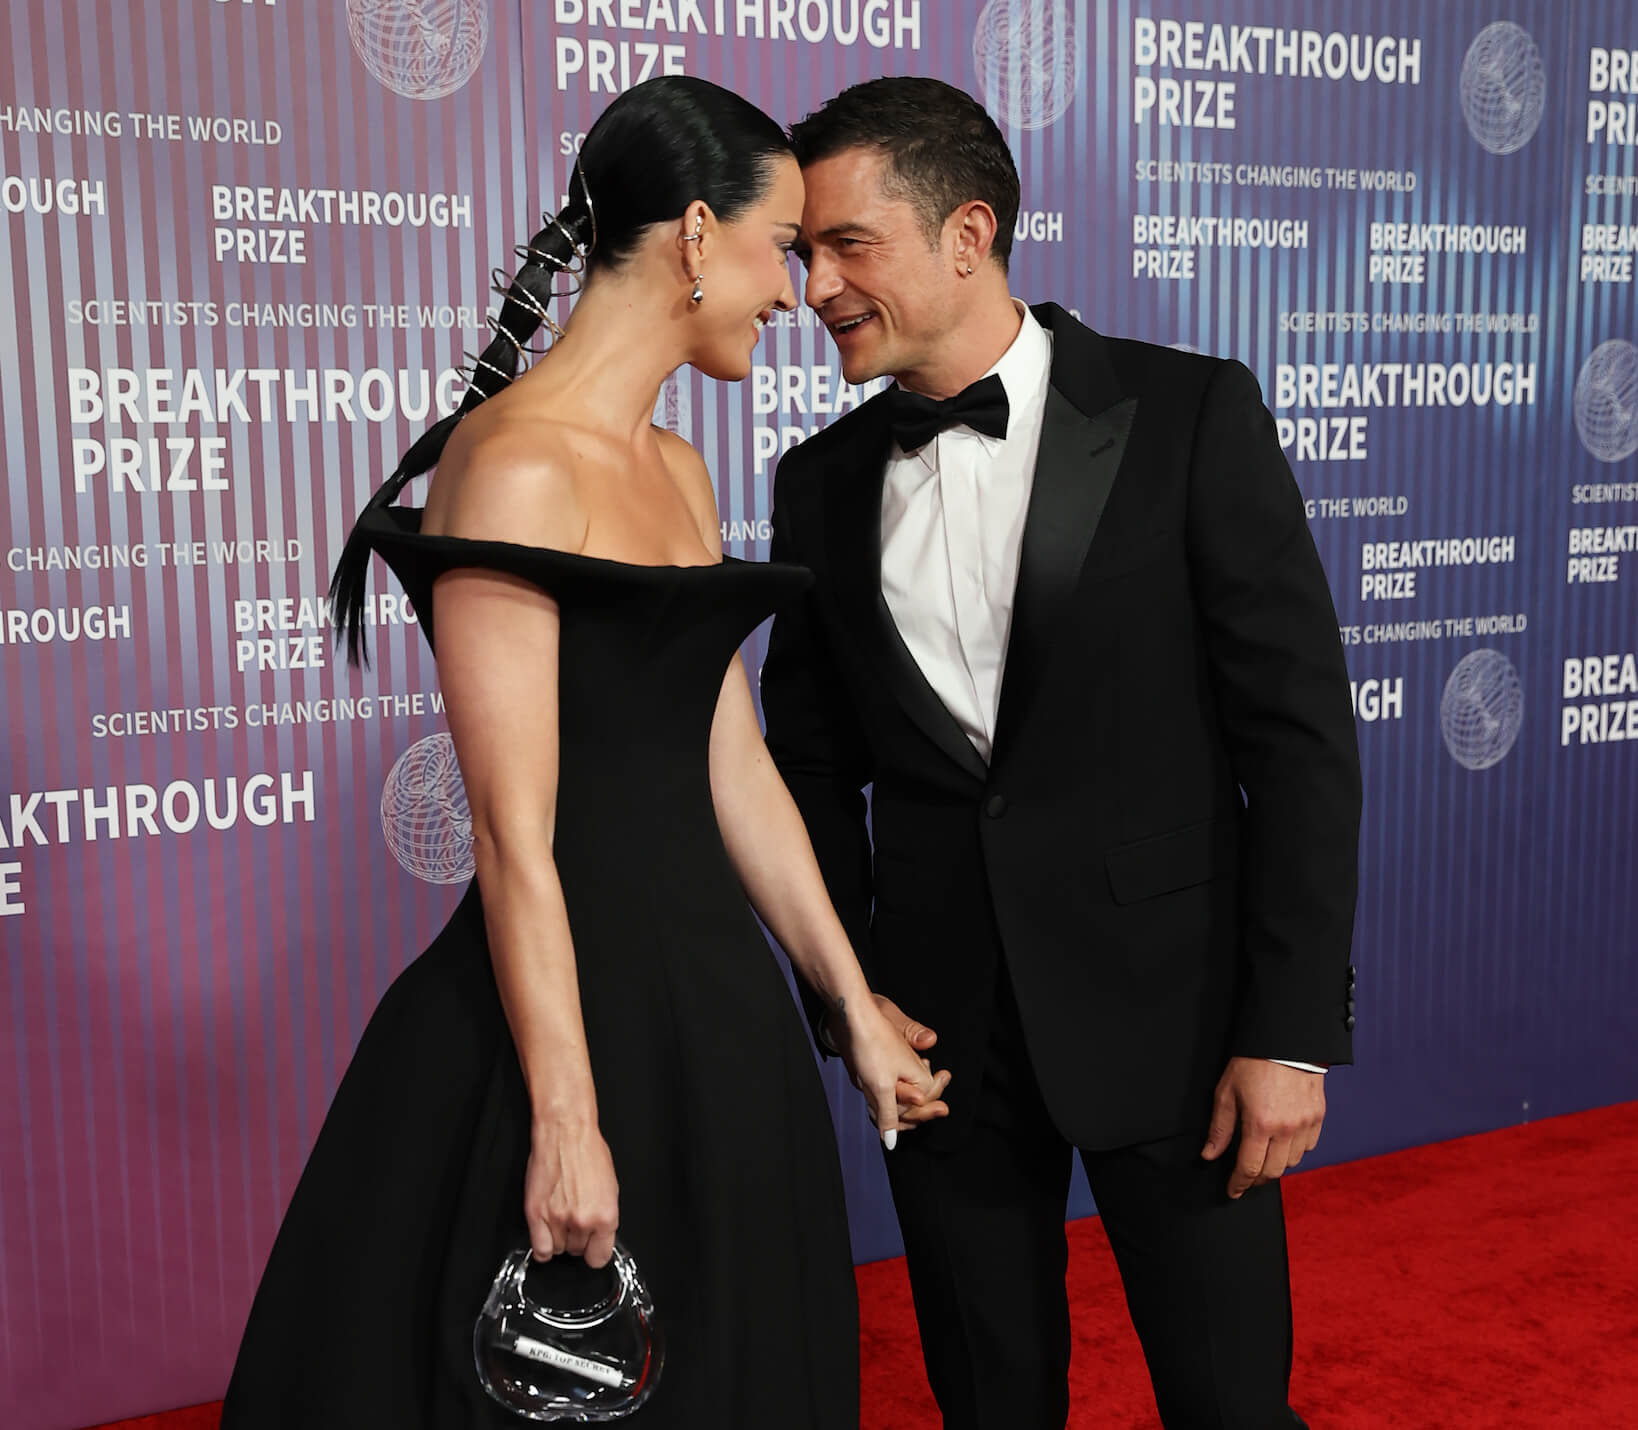 Katy Perry and Orlando Bloom standing on the red carpet while attending the 10th Annual Breakthrough Prize Awards. Perry is dressed in a black dress and Bloom is dressed in a tuxedo.